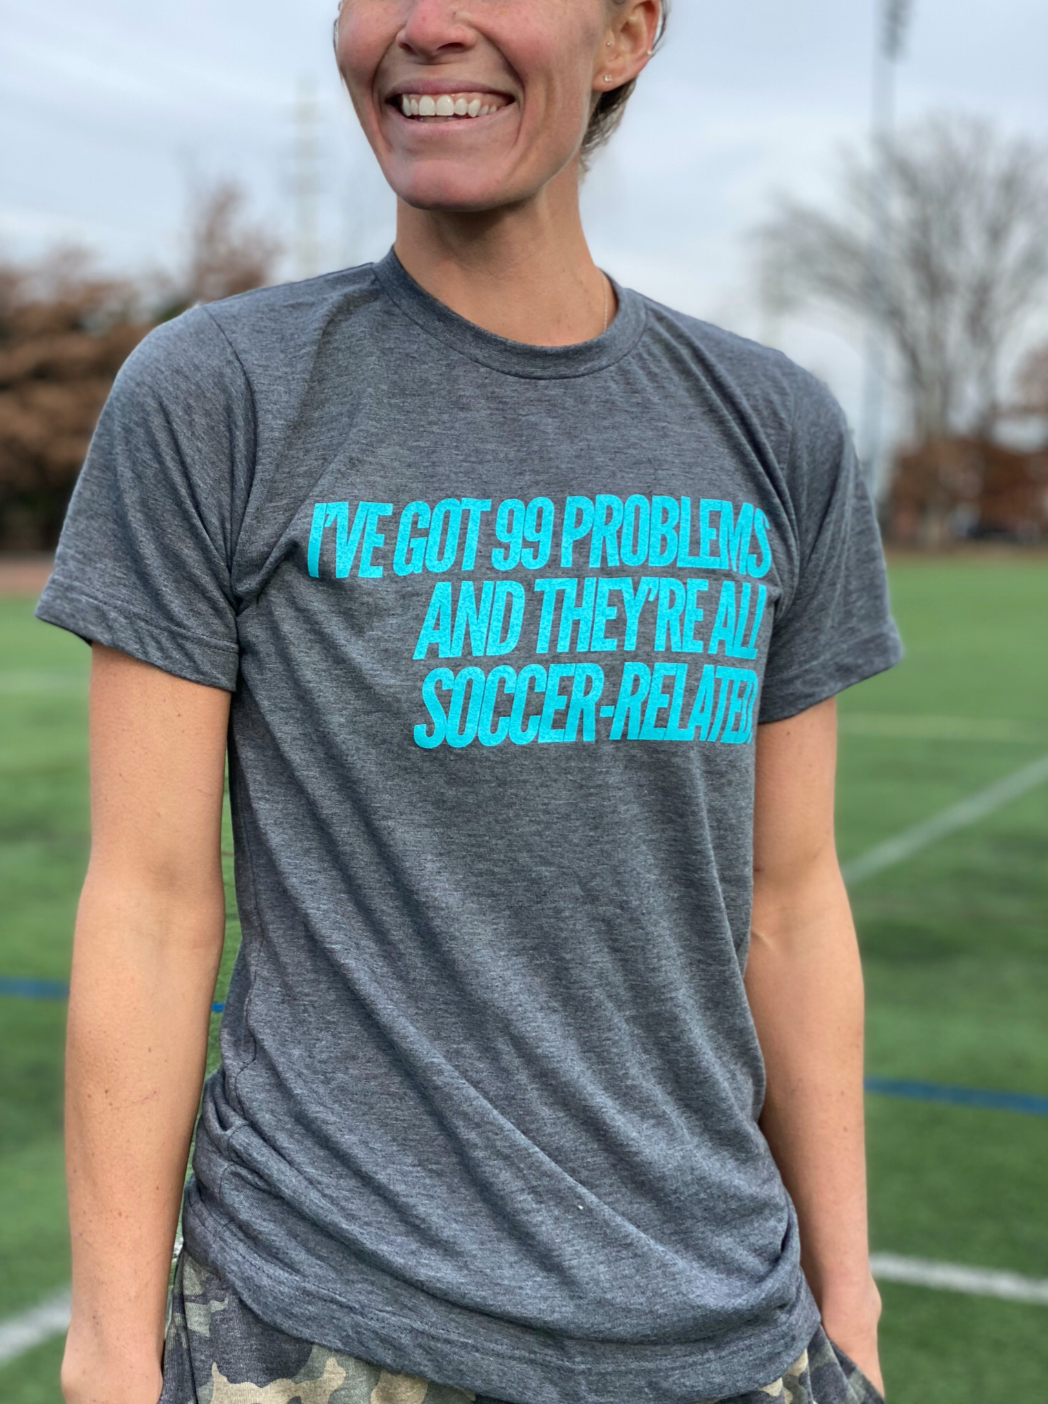 99 Soccer-Related Problems T-Shirt